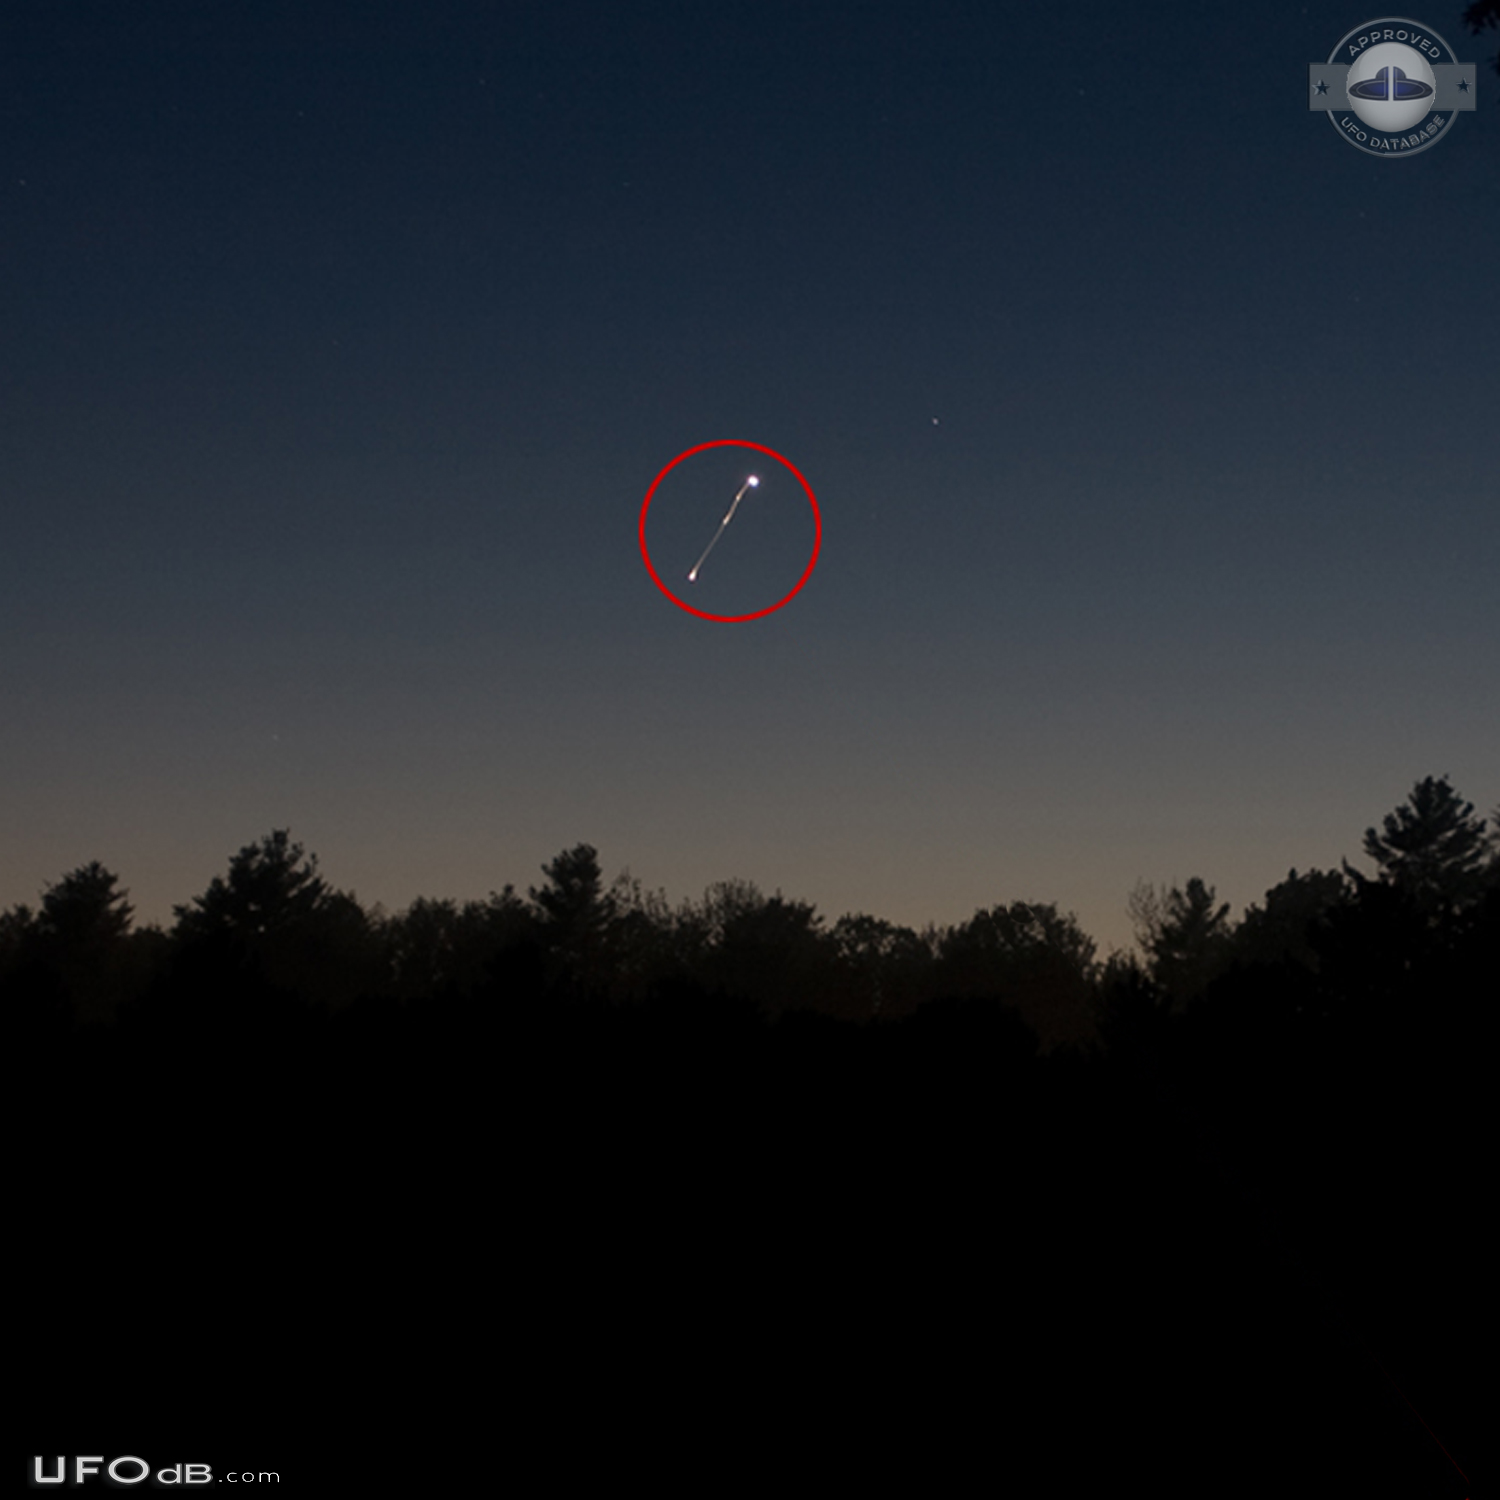 Mysterious Lights UFOS Observed Near Apsley Ontario Canada 2015 UFO Picture #721-2